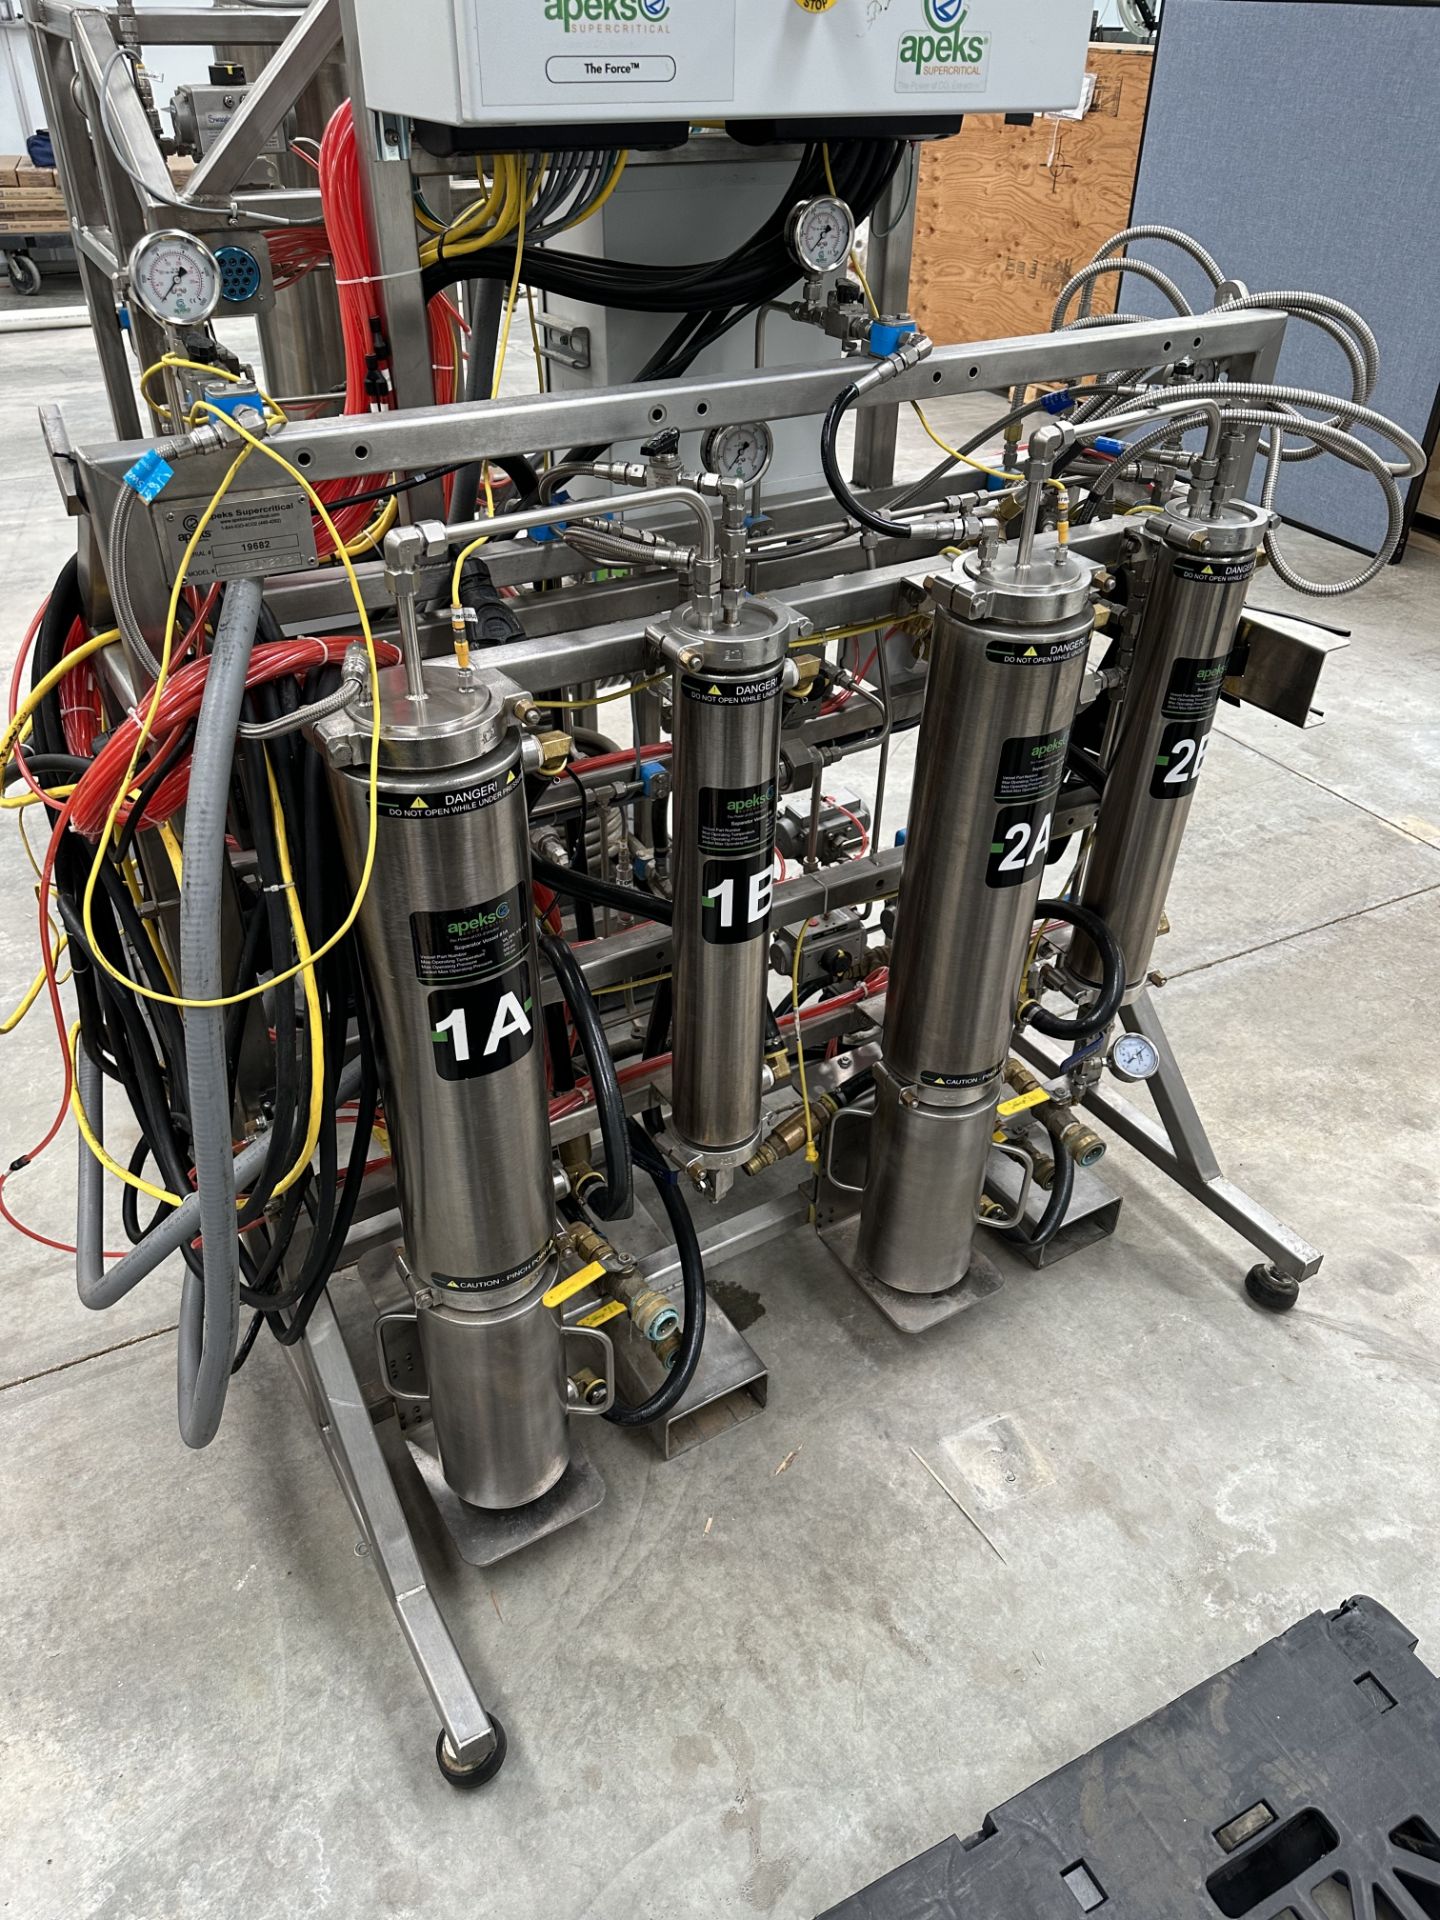 Used Apeks Supercritical CO2 Extraction System w/ (2) Chillers, Air Compressor. Model "The Force" - Image 3 of 35